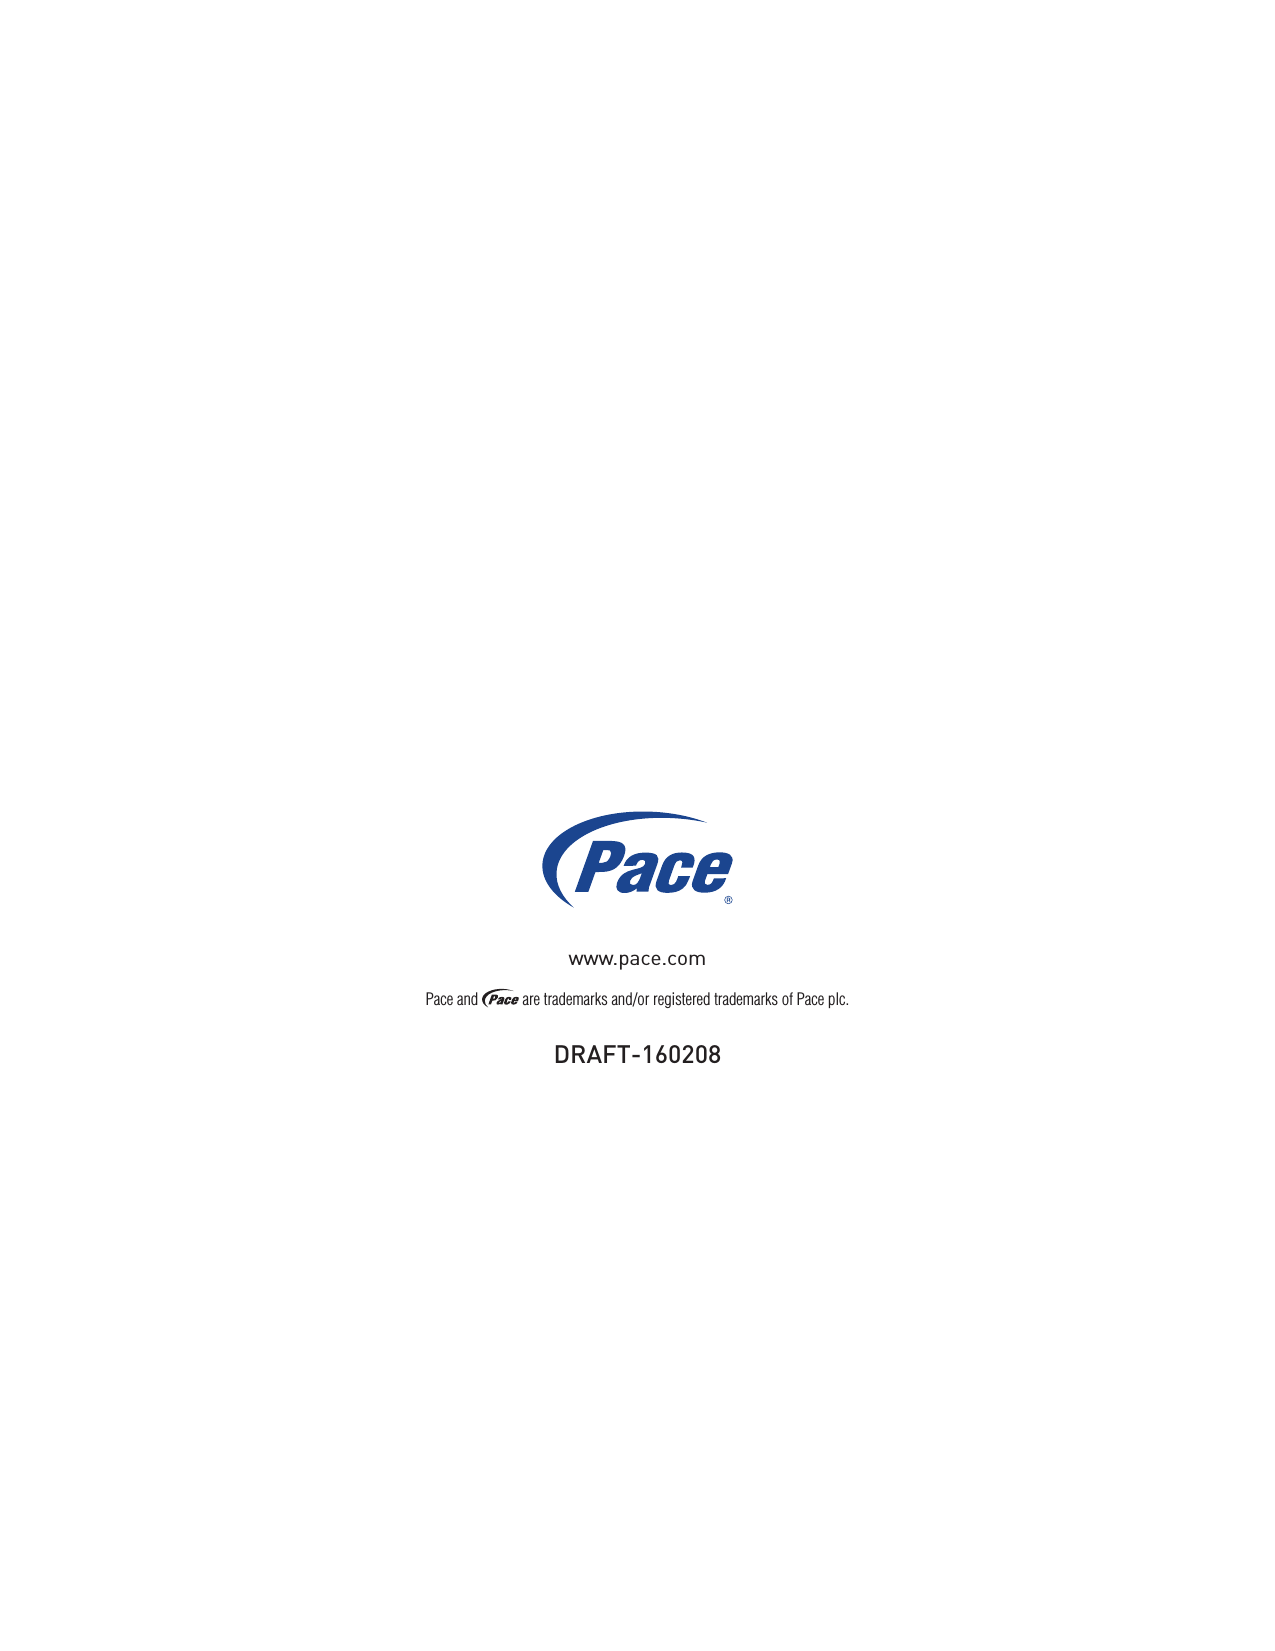 DRAFT-160208Pace and   are trademarks and/or registered trademarks of Pace plc.www.pace.com